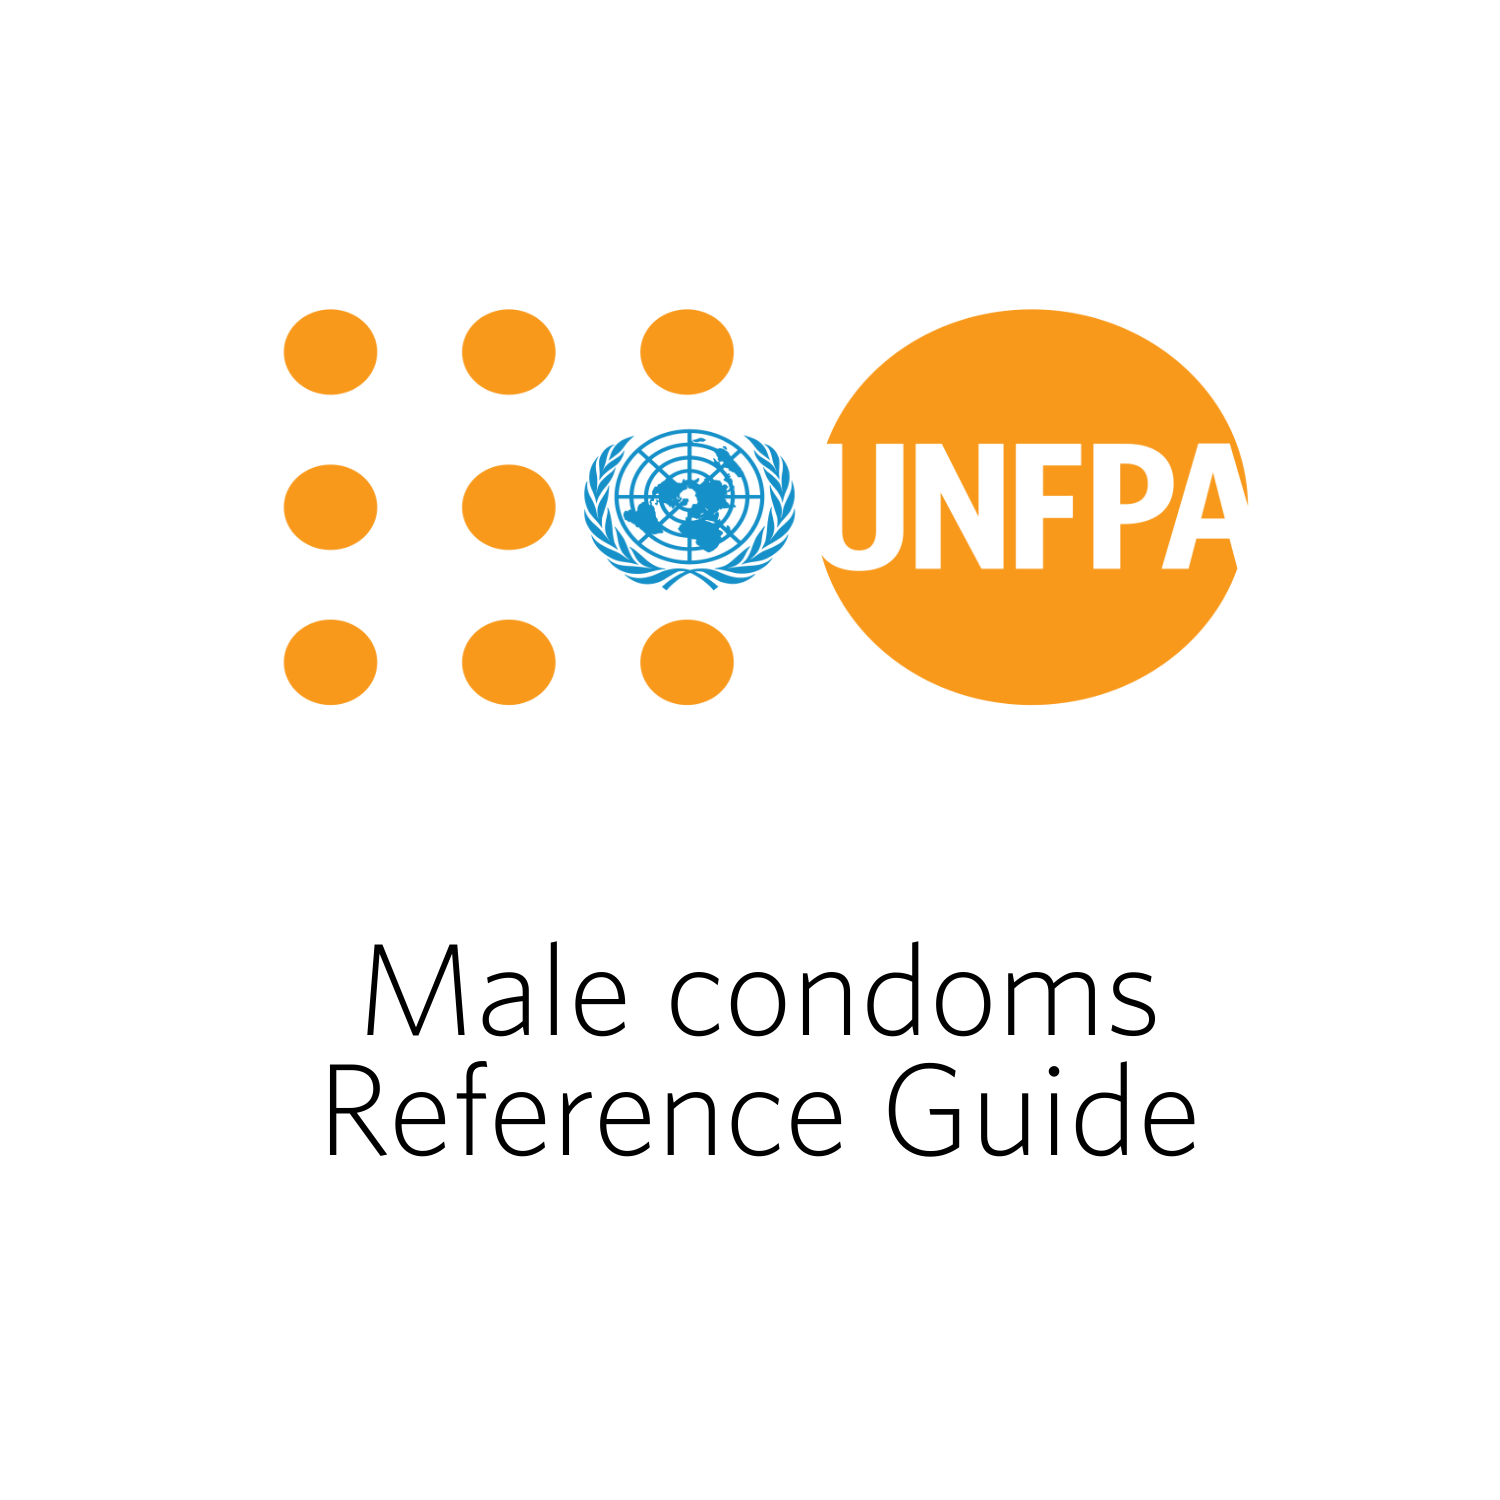 Male condoms reference guide